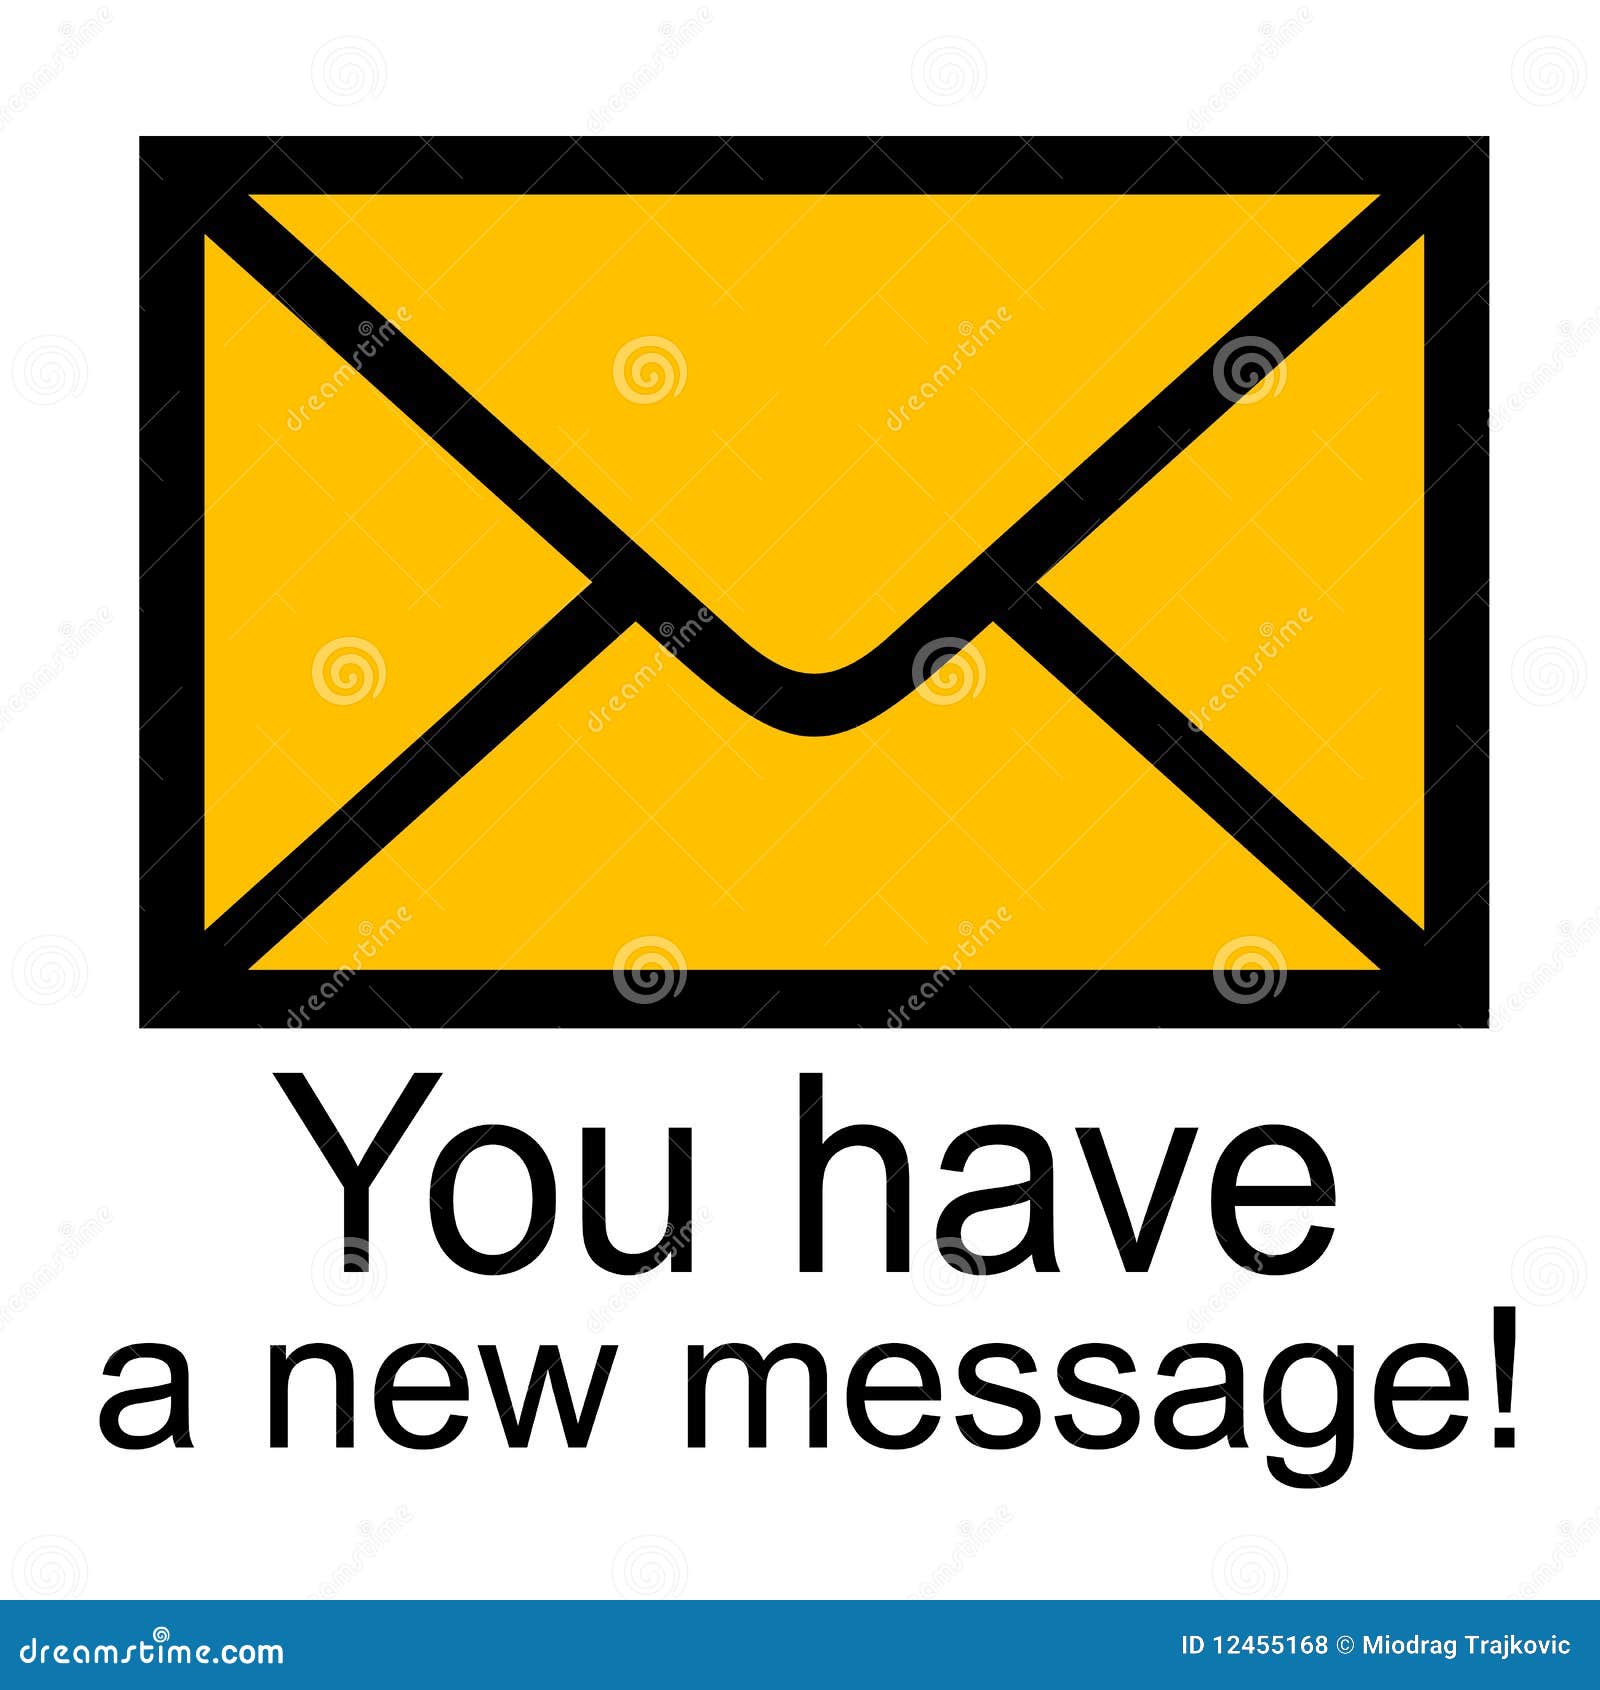 You have received a new message